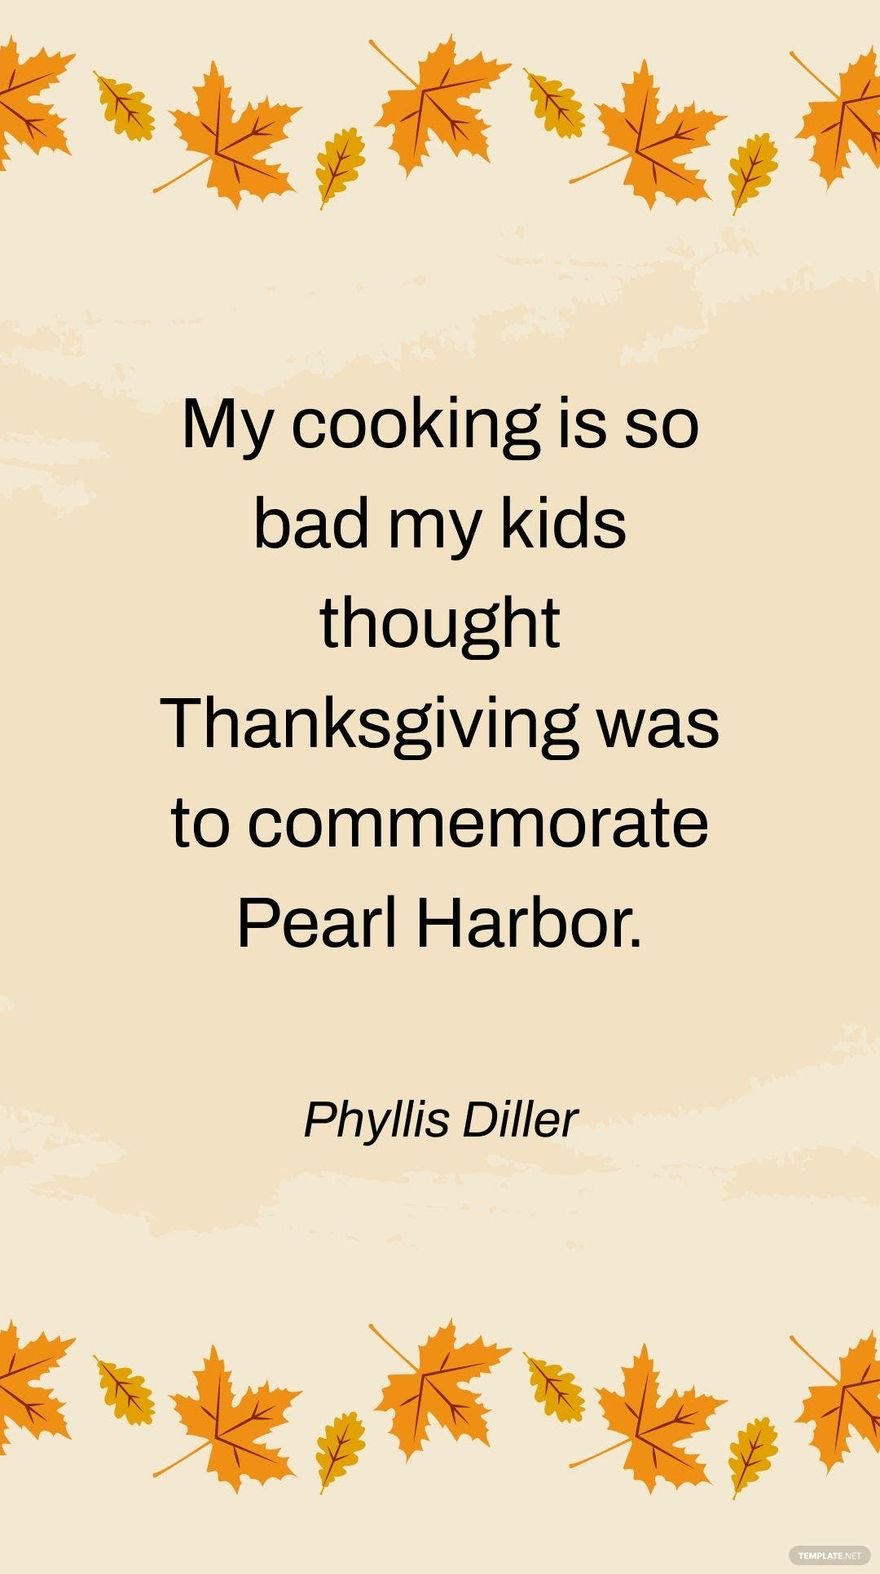 Phyllis Diller - My cooking is so bad my kids thought Thanksgiving was to commemorate Pearl Harbor.